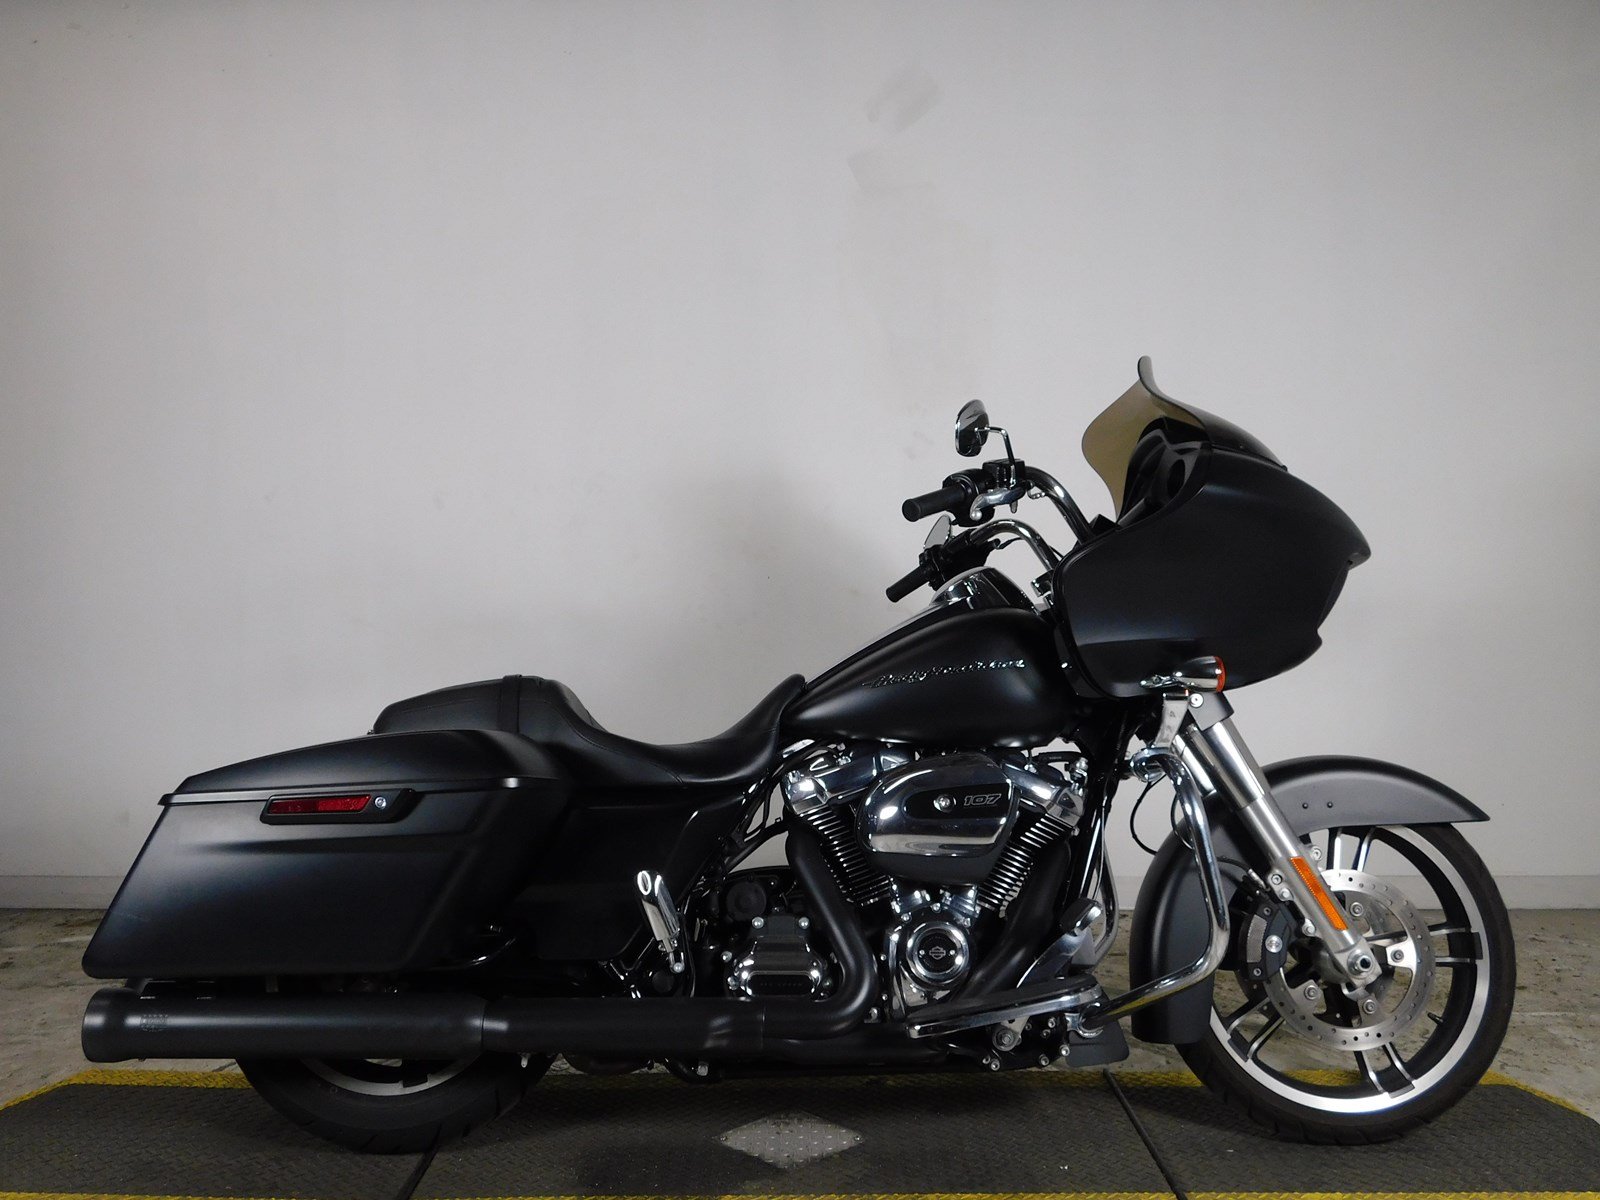 Gloss black Harley touring Up to 2014 Saddlebag handle bar/grips and face covers